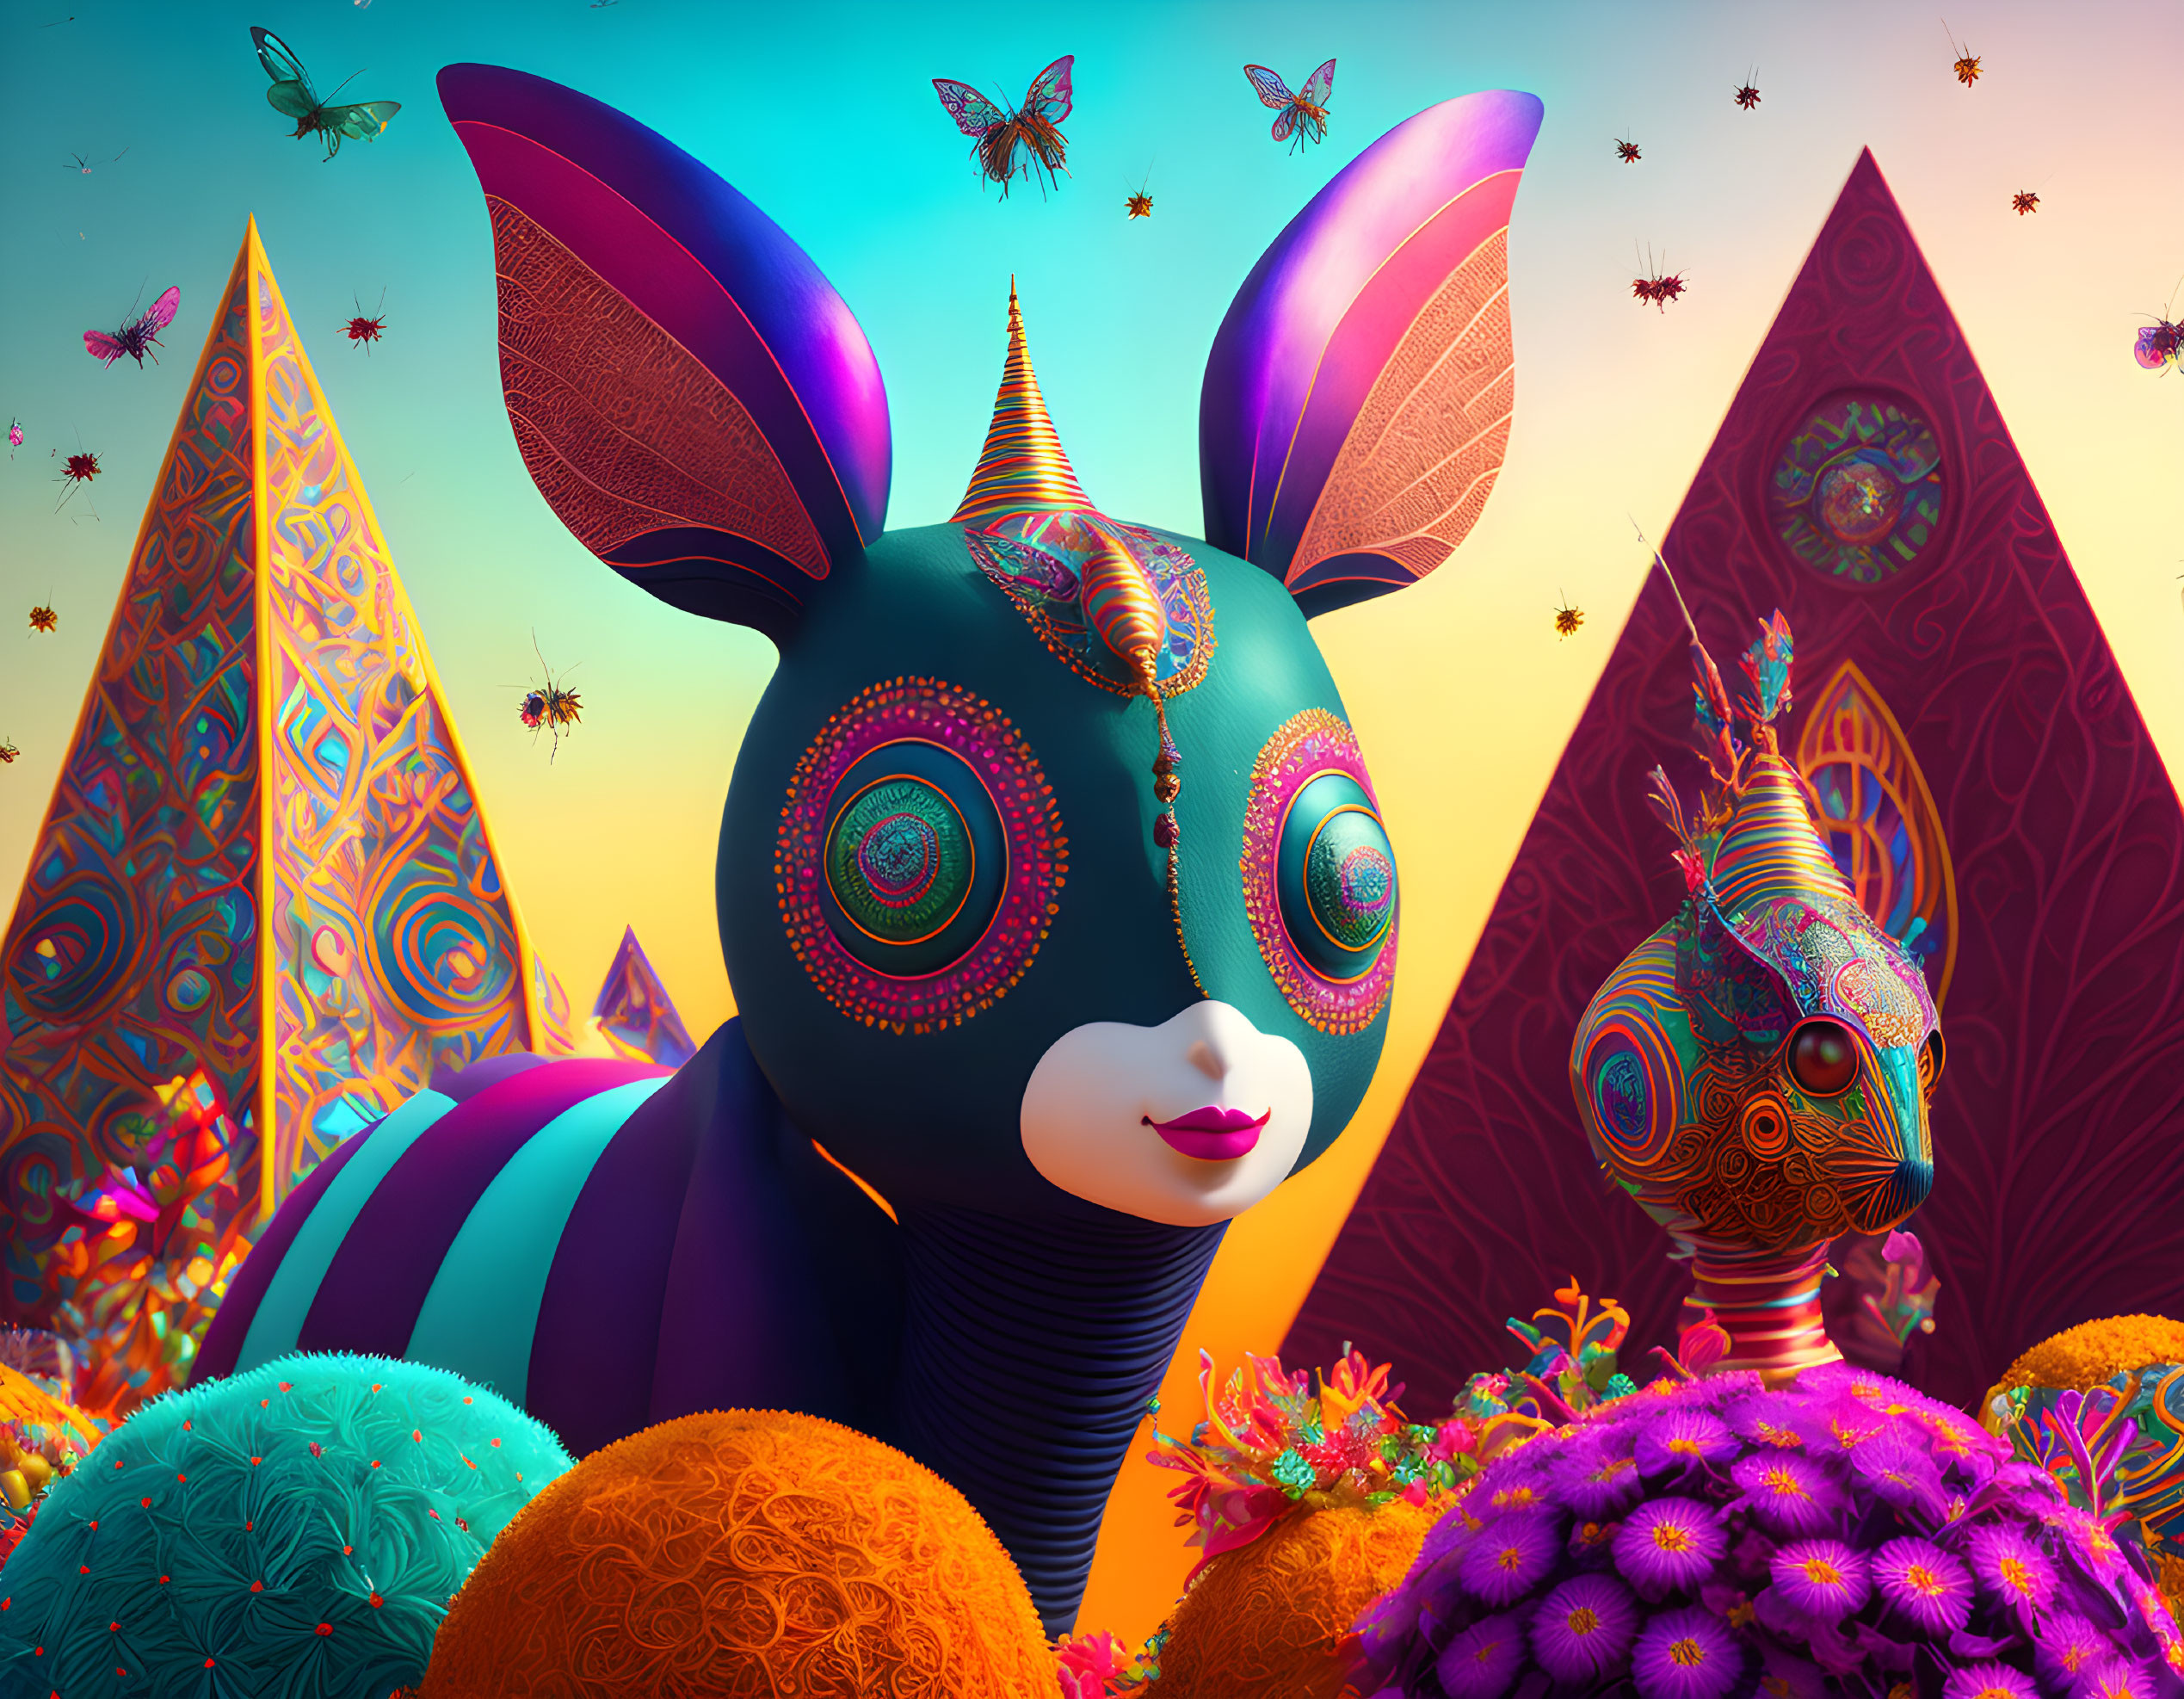 Colorful Surrealist Landscape with Striped Rabbit Creature and Whimsical Flora